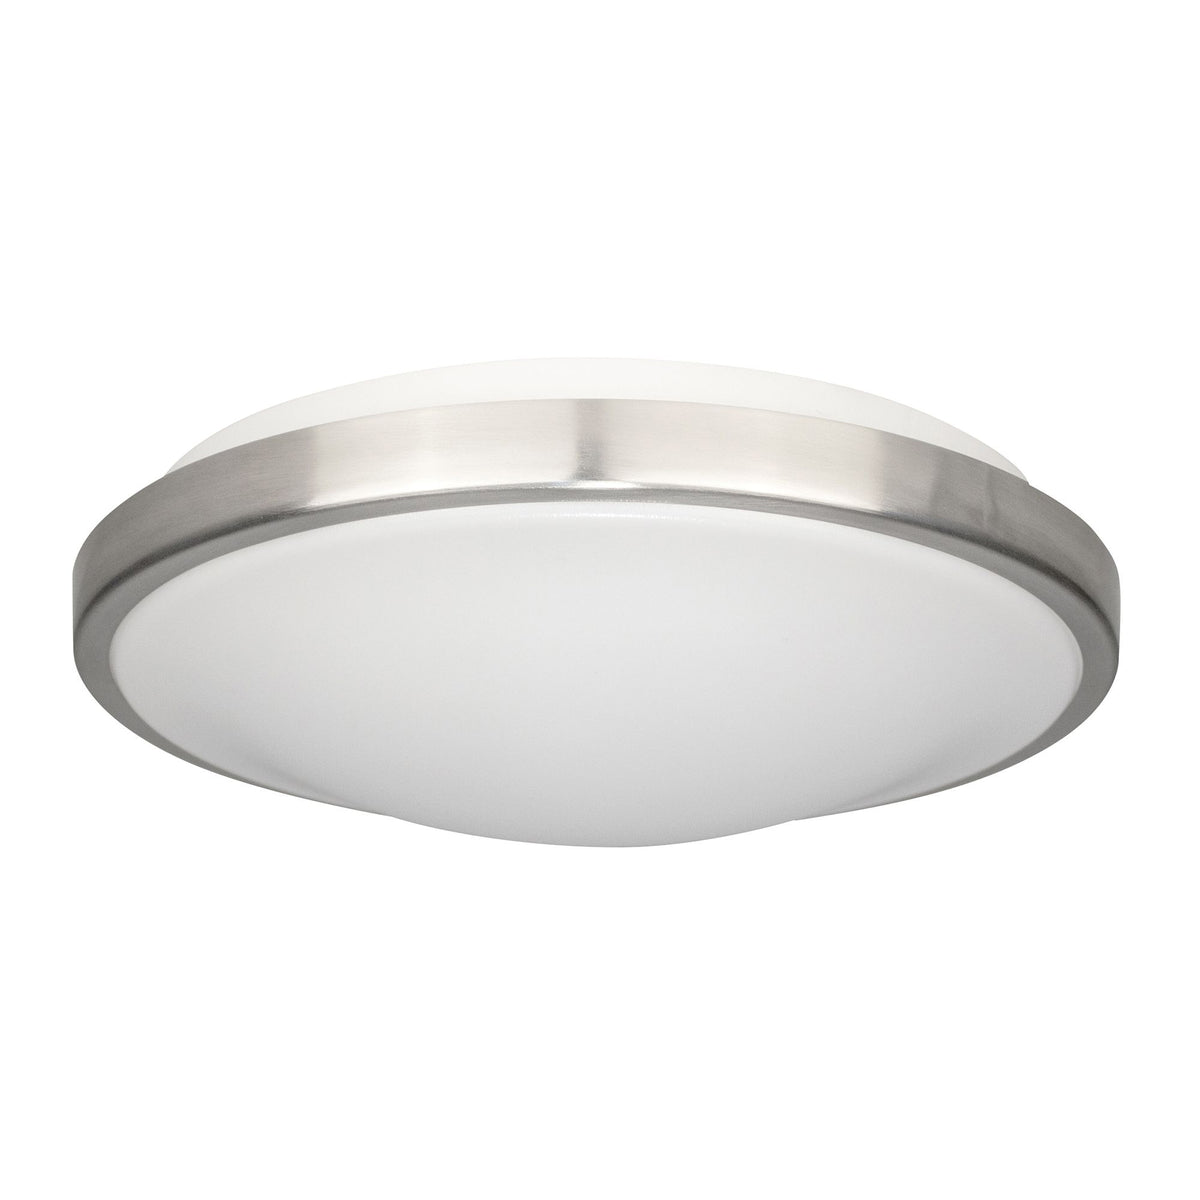 Flush Mount Ceiling Light Fixture LED (Milk White Shell / 12 Inch / 15W, 1200 LM), 3 CCT, Dimmable